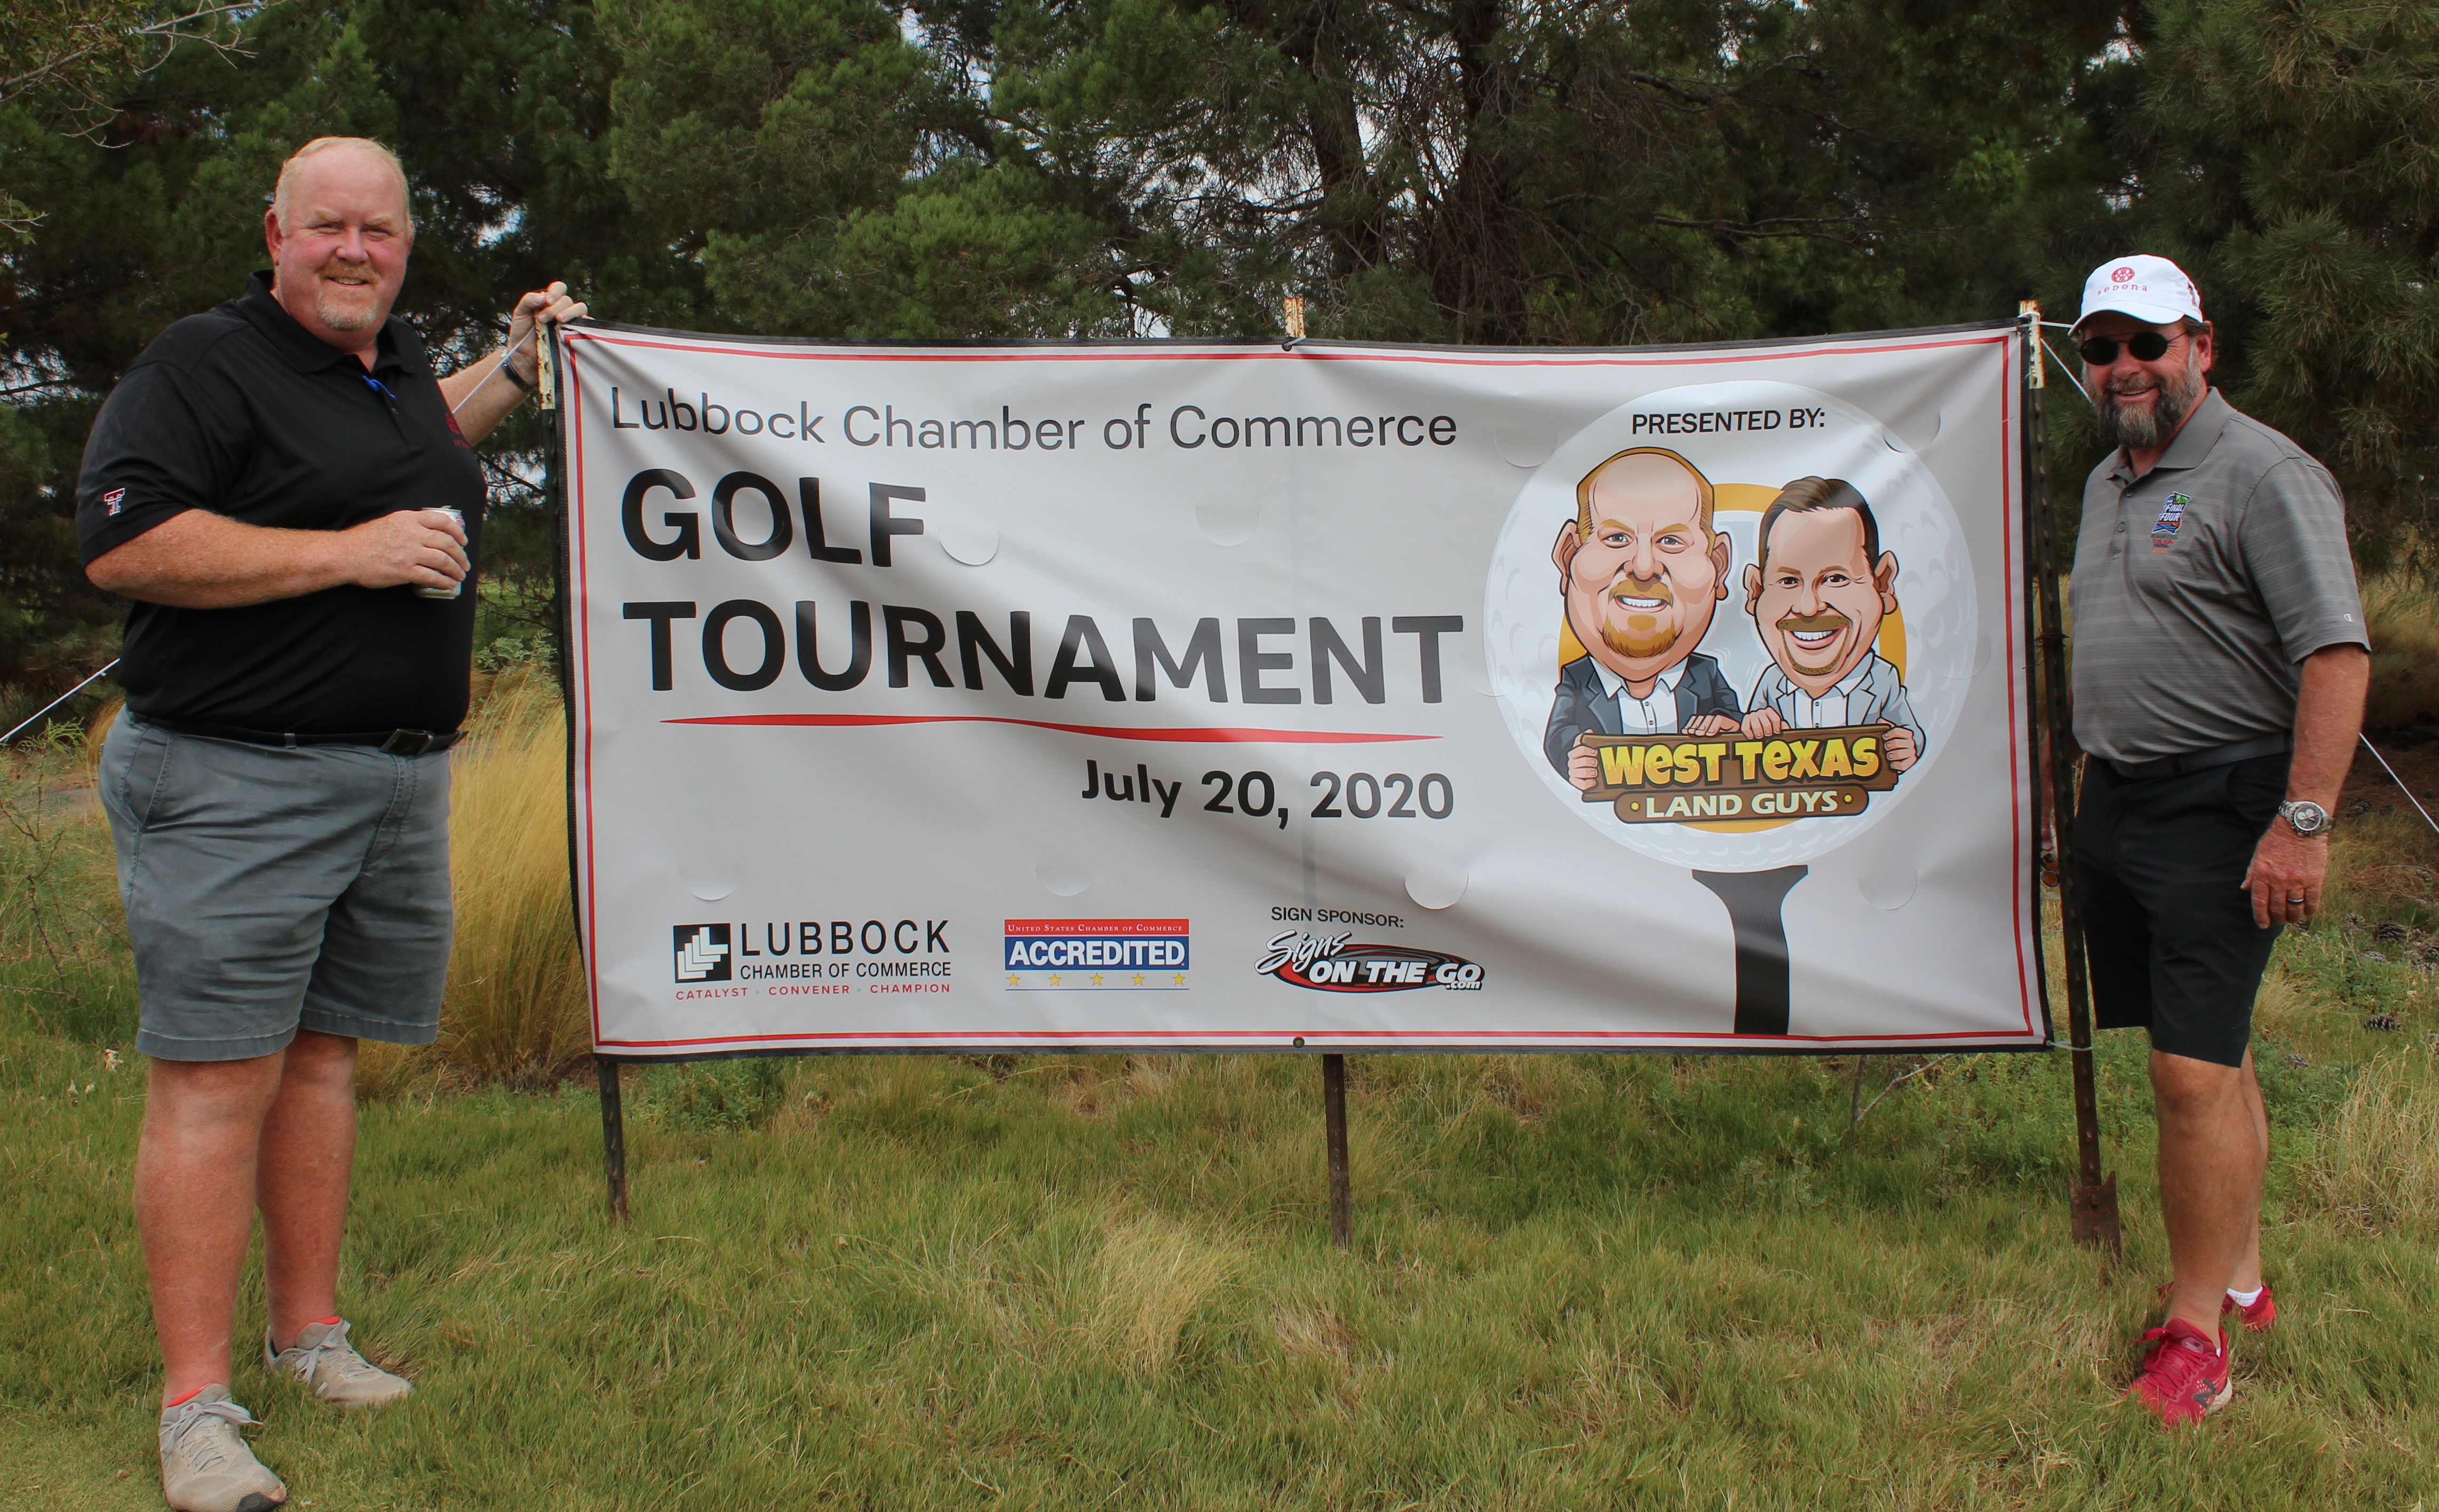 Congratulations to the Winners of the 2020 Chamber Golf Tournament presented by West Texas Land Guys!